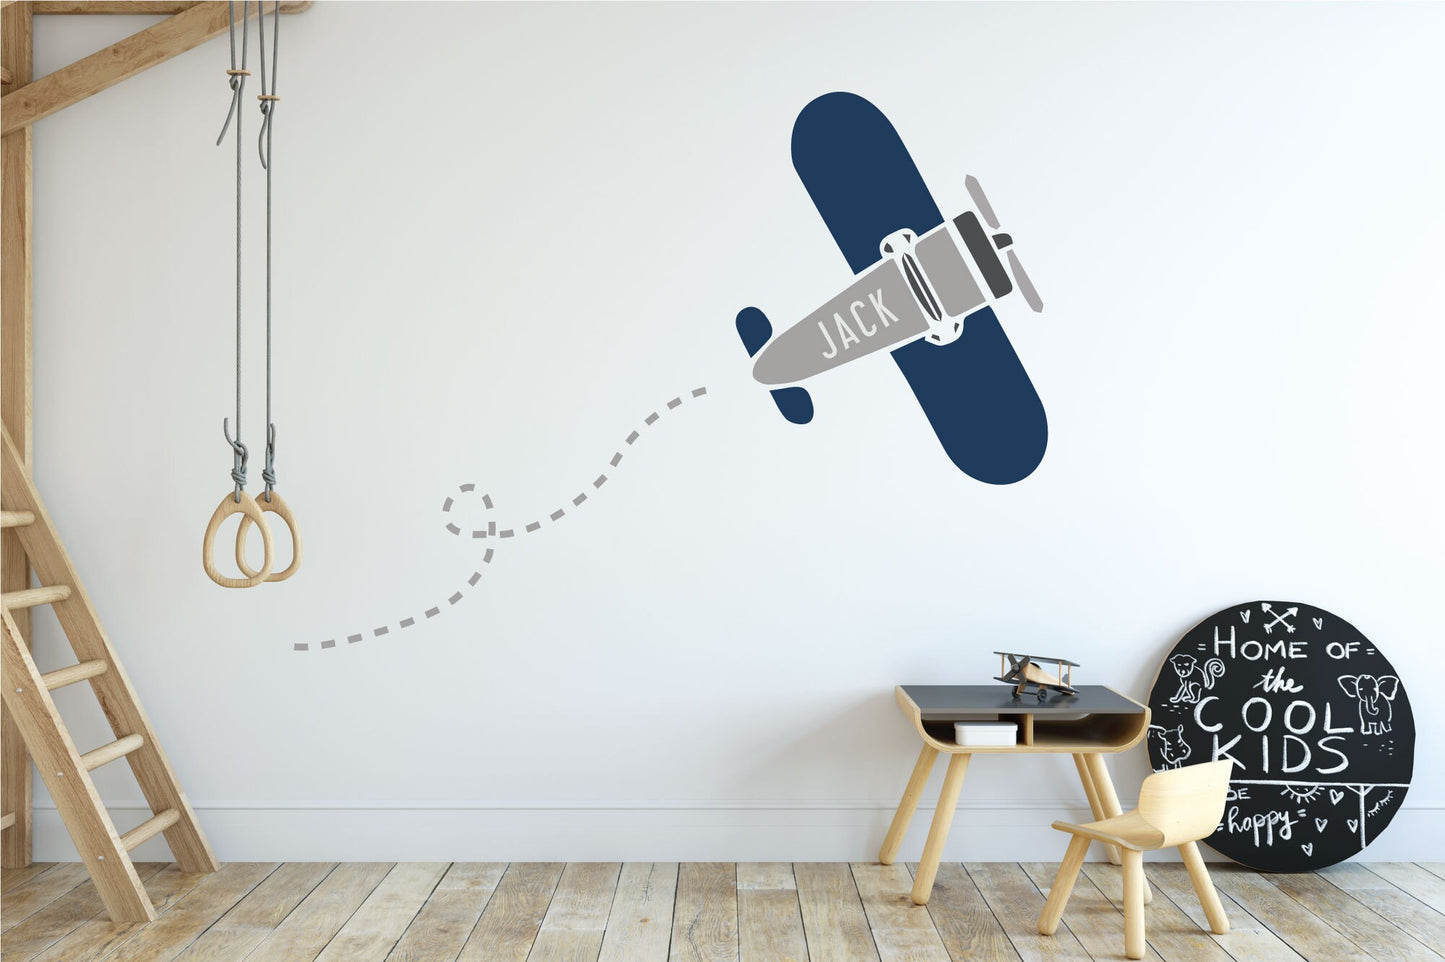 Airplane Wall Decal